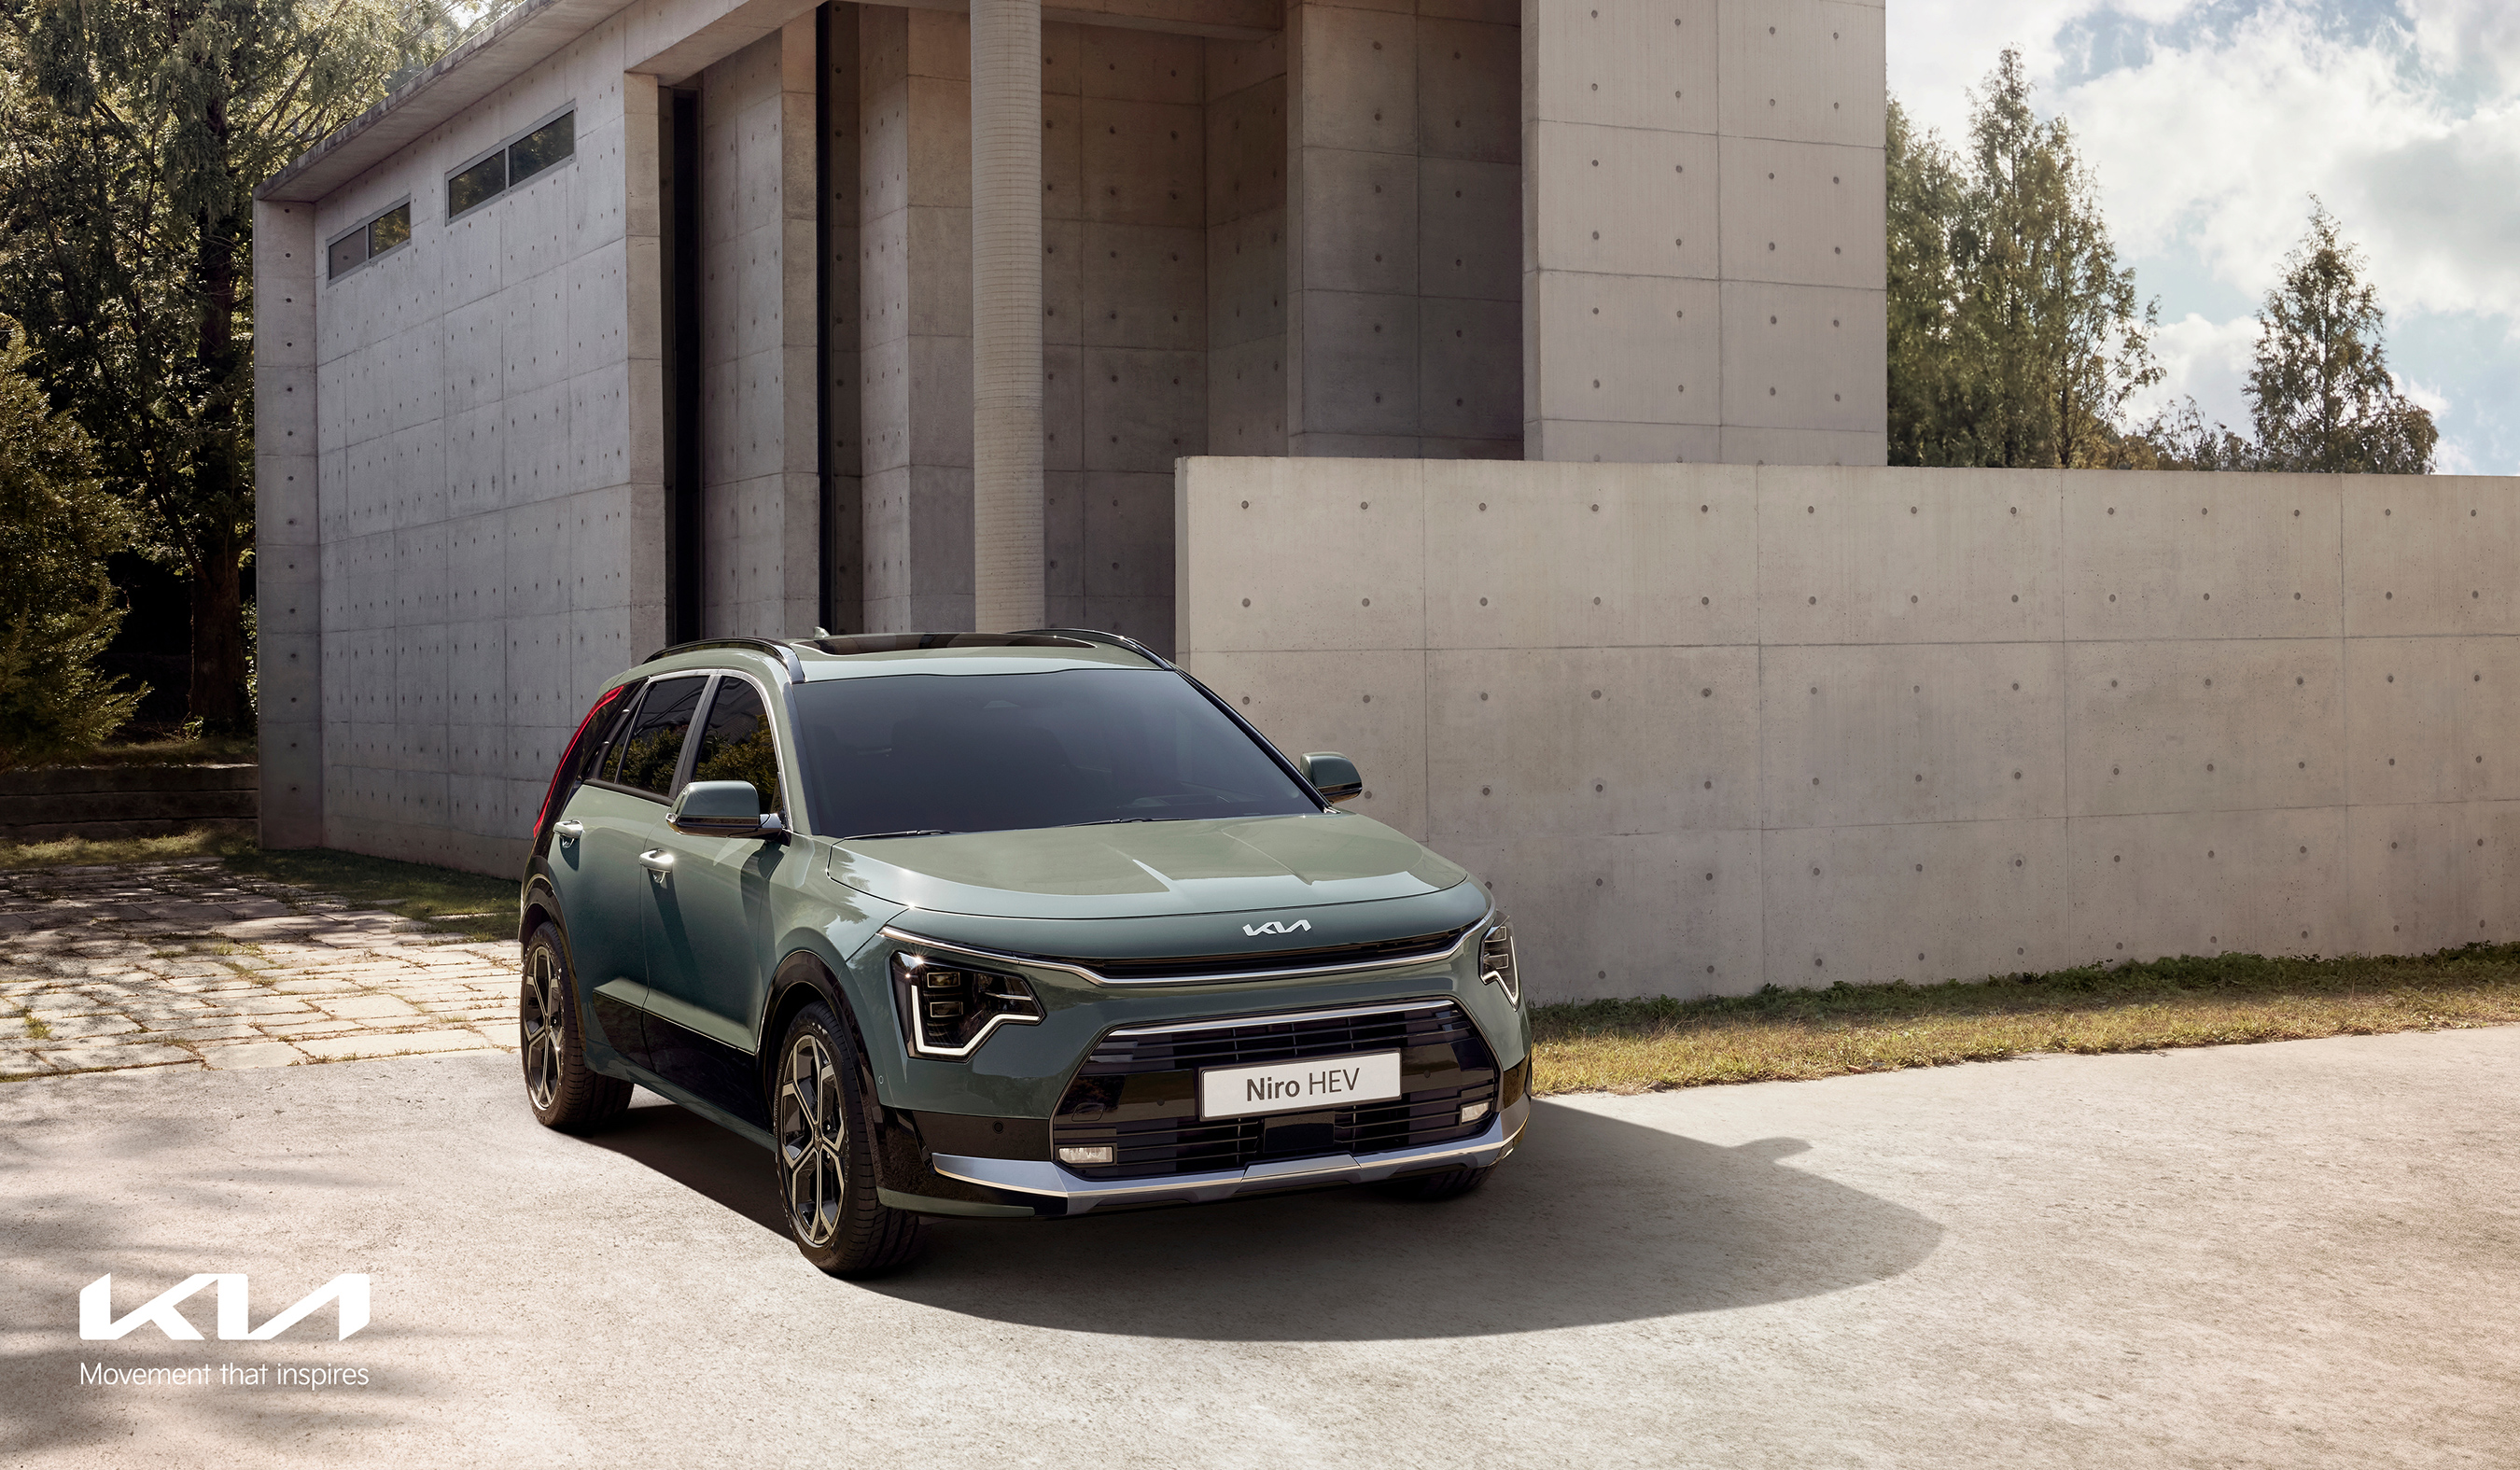 The all-new Niro embodies Kia's commitment to building a more sustainable future